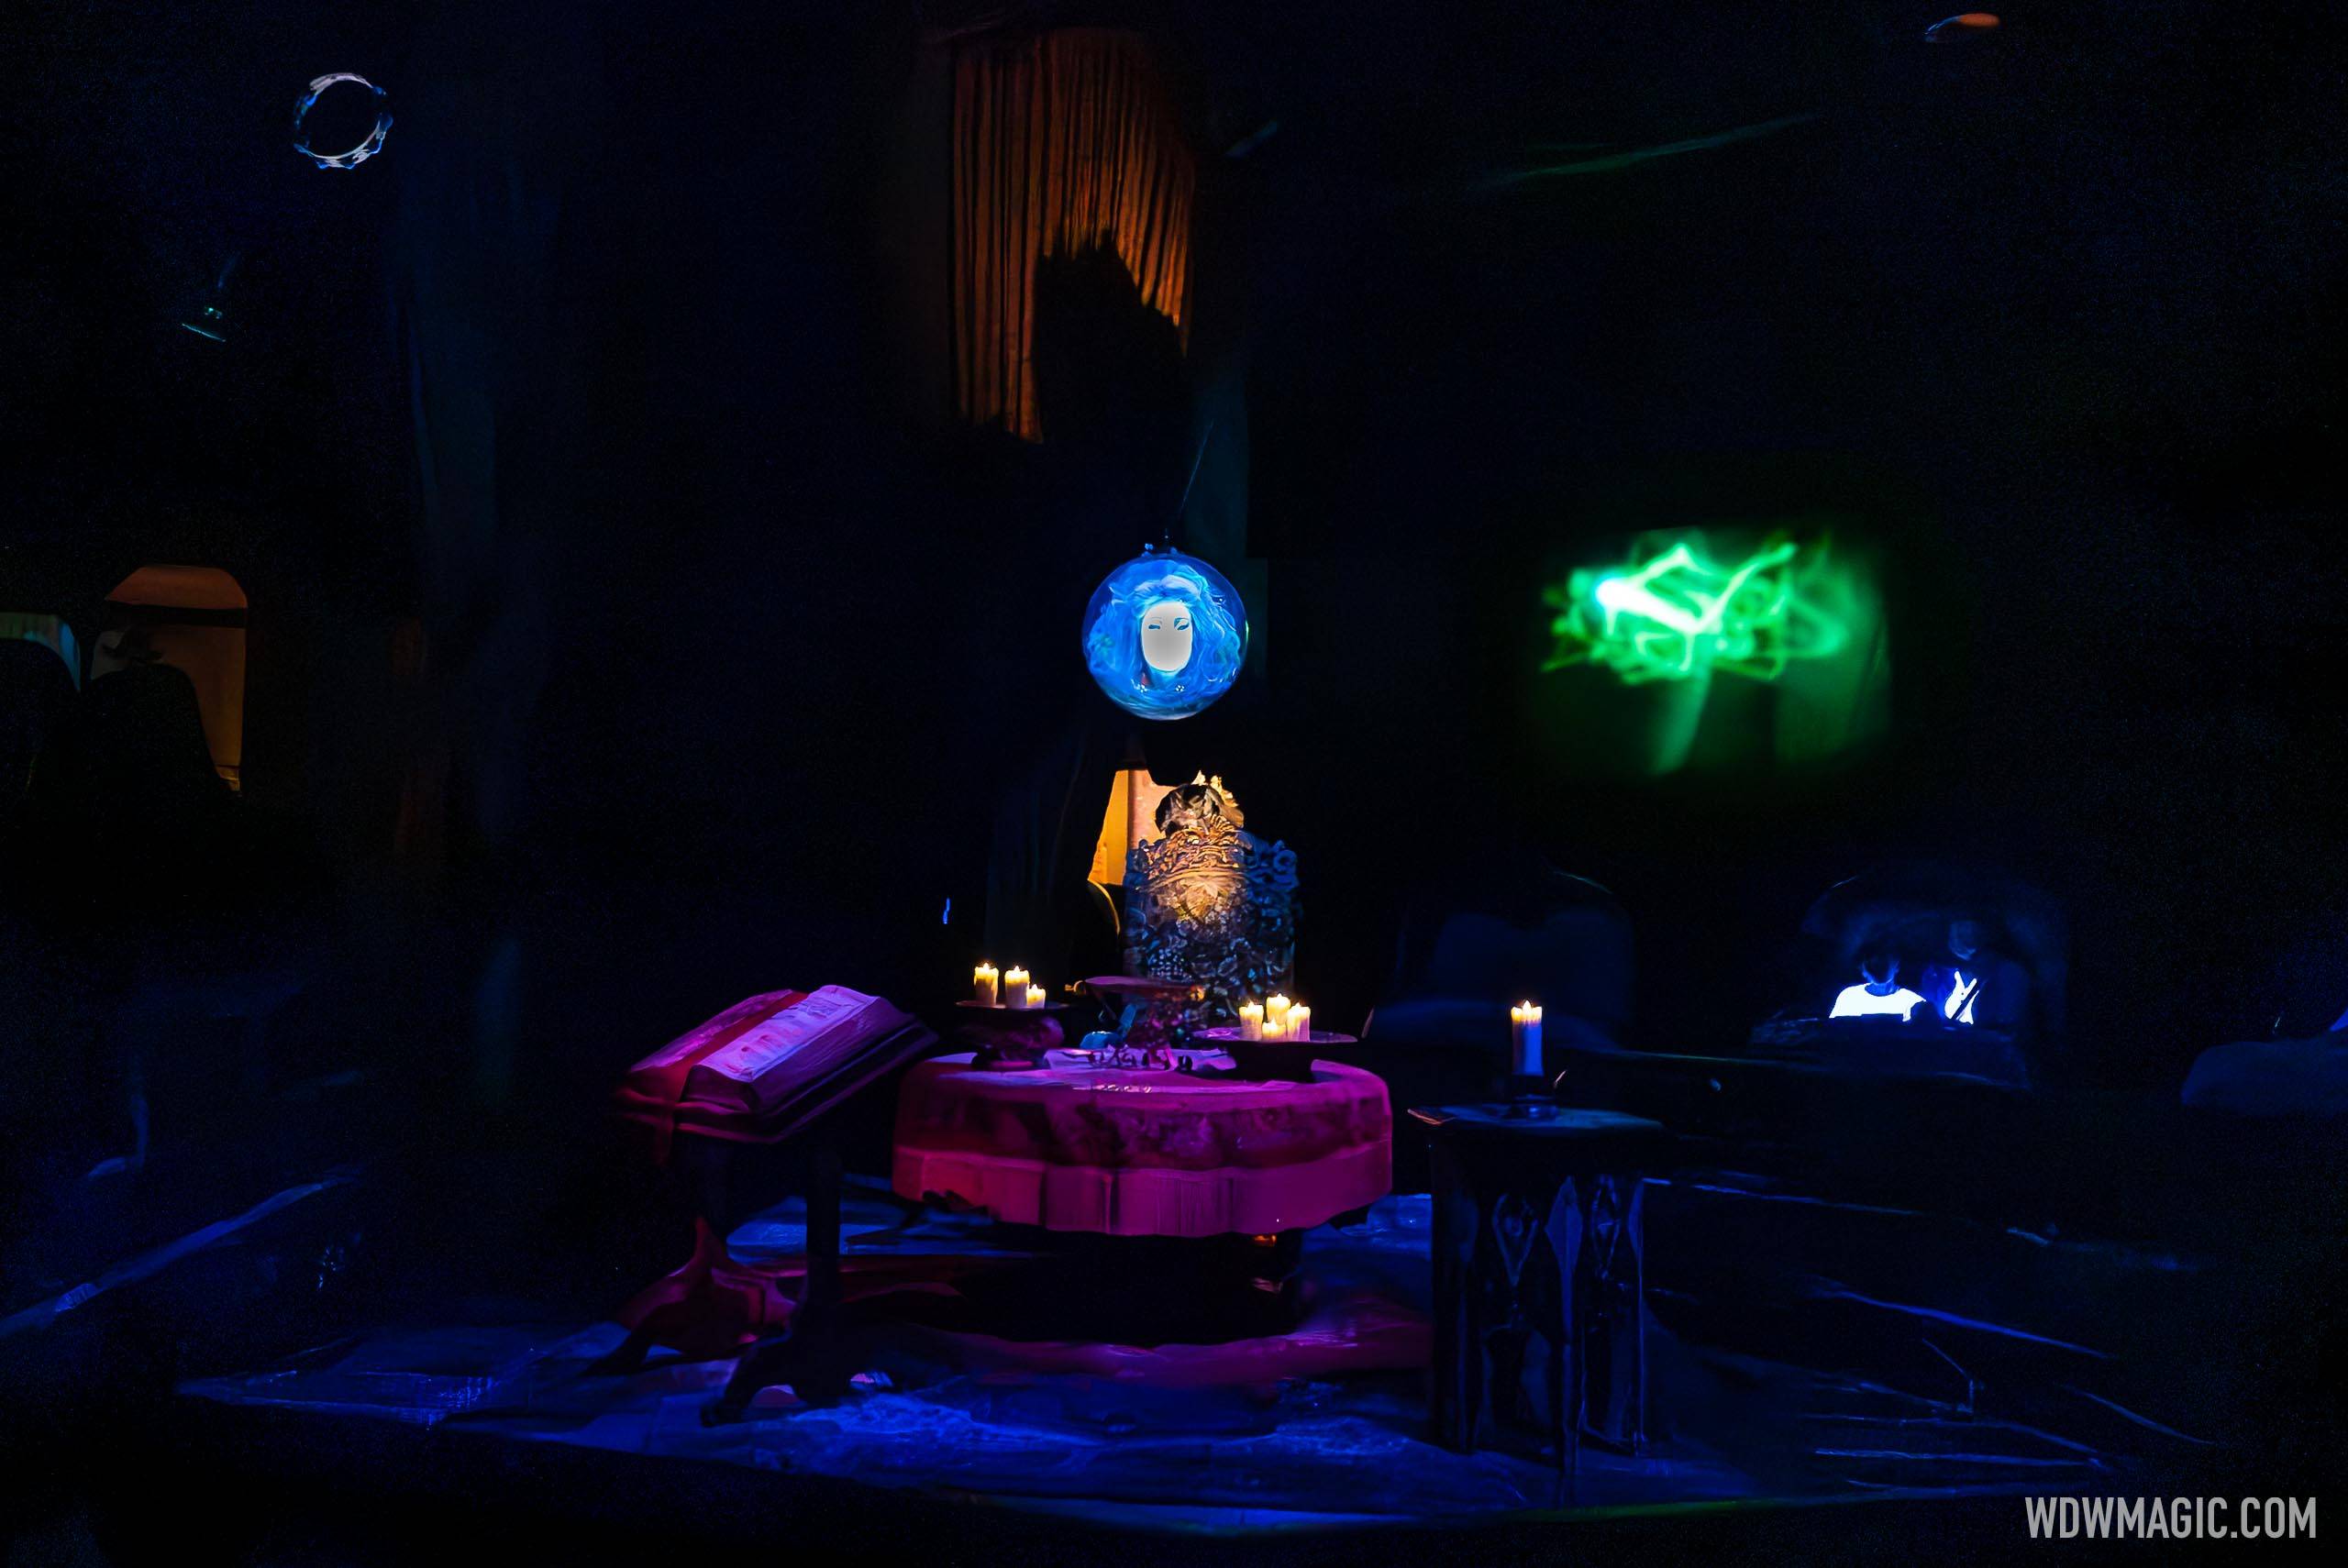 VIDEO - Haunted Mansion debuts amazing new augmented reality Hitchhiking Ghosts scene